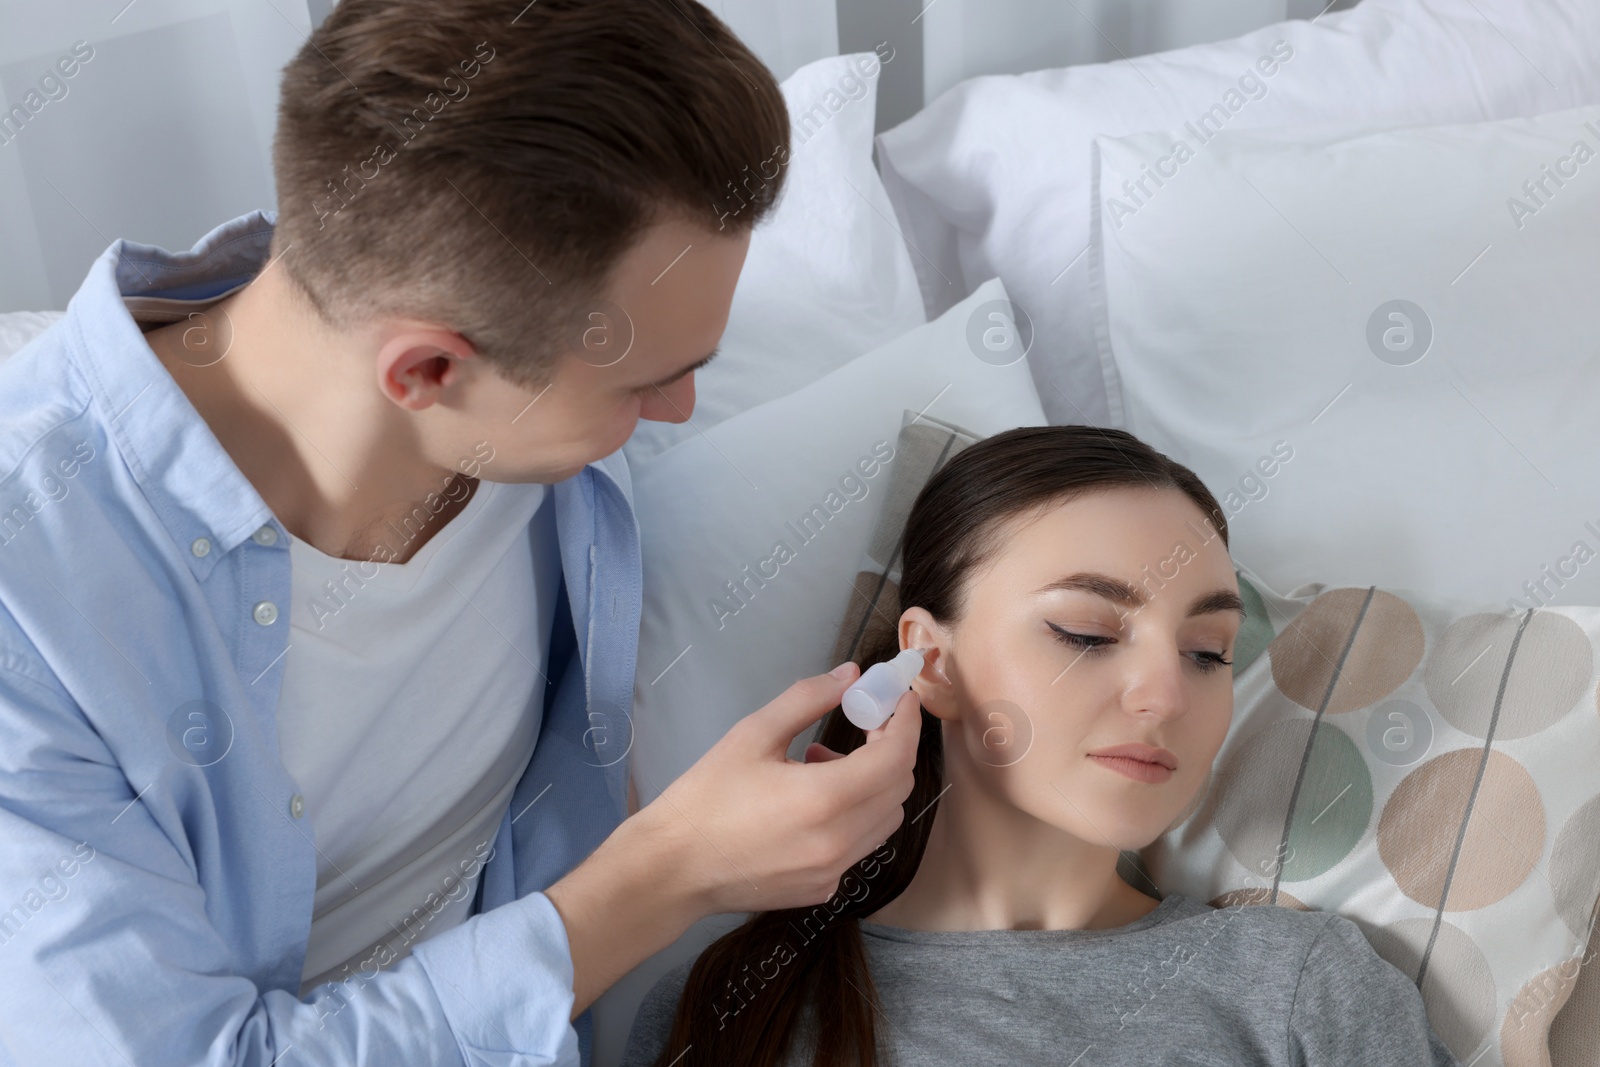 Photo of Man dripping medication into woman's ear at home